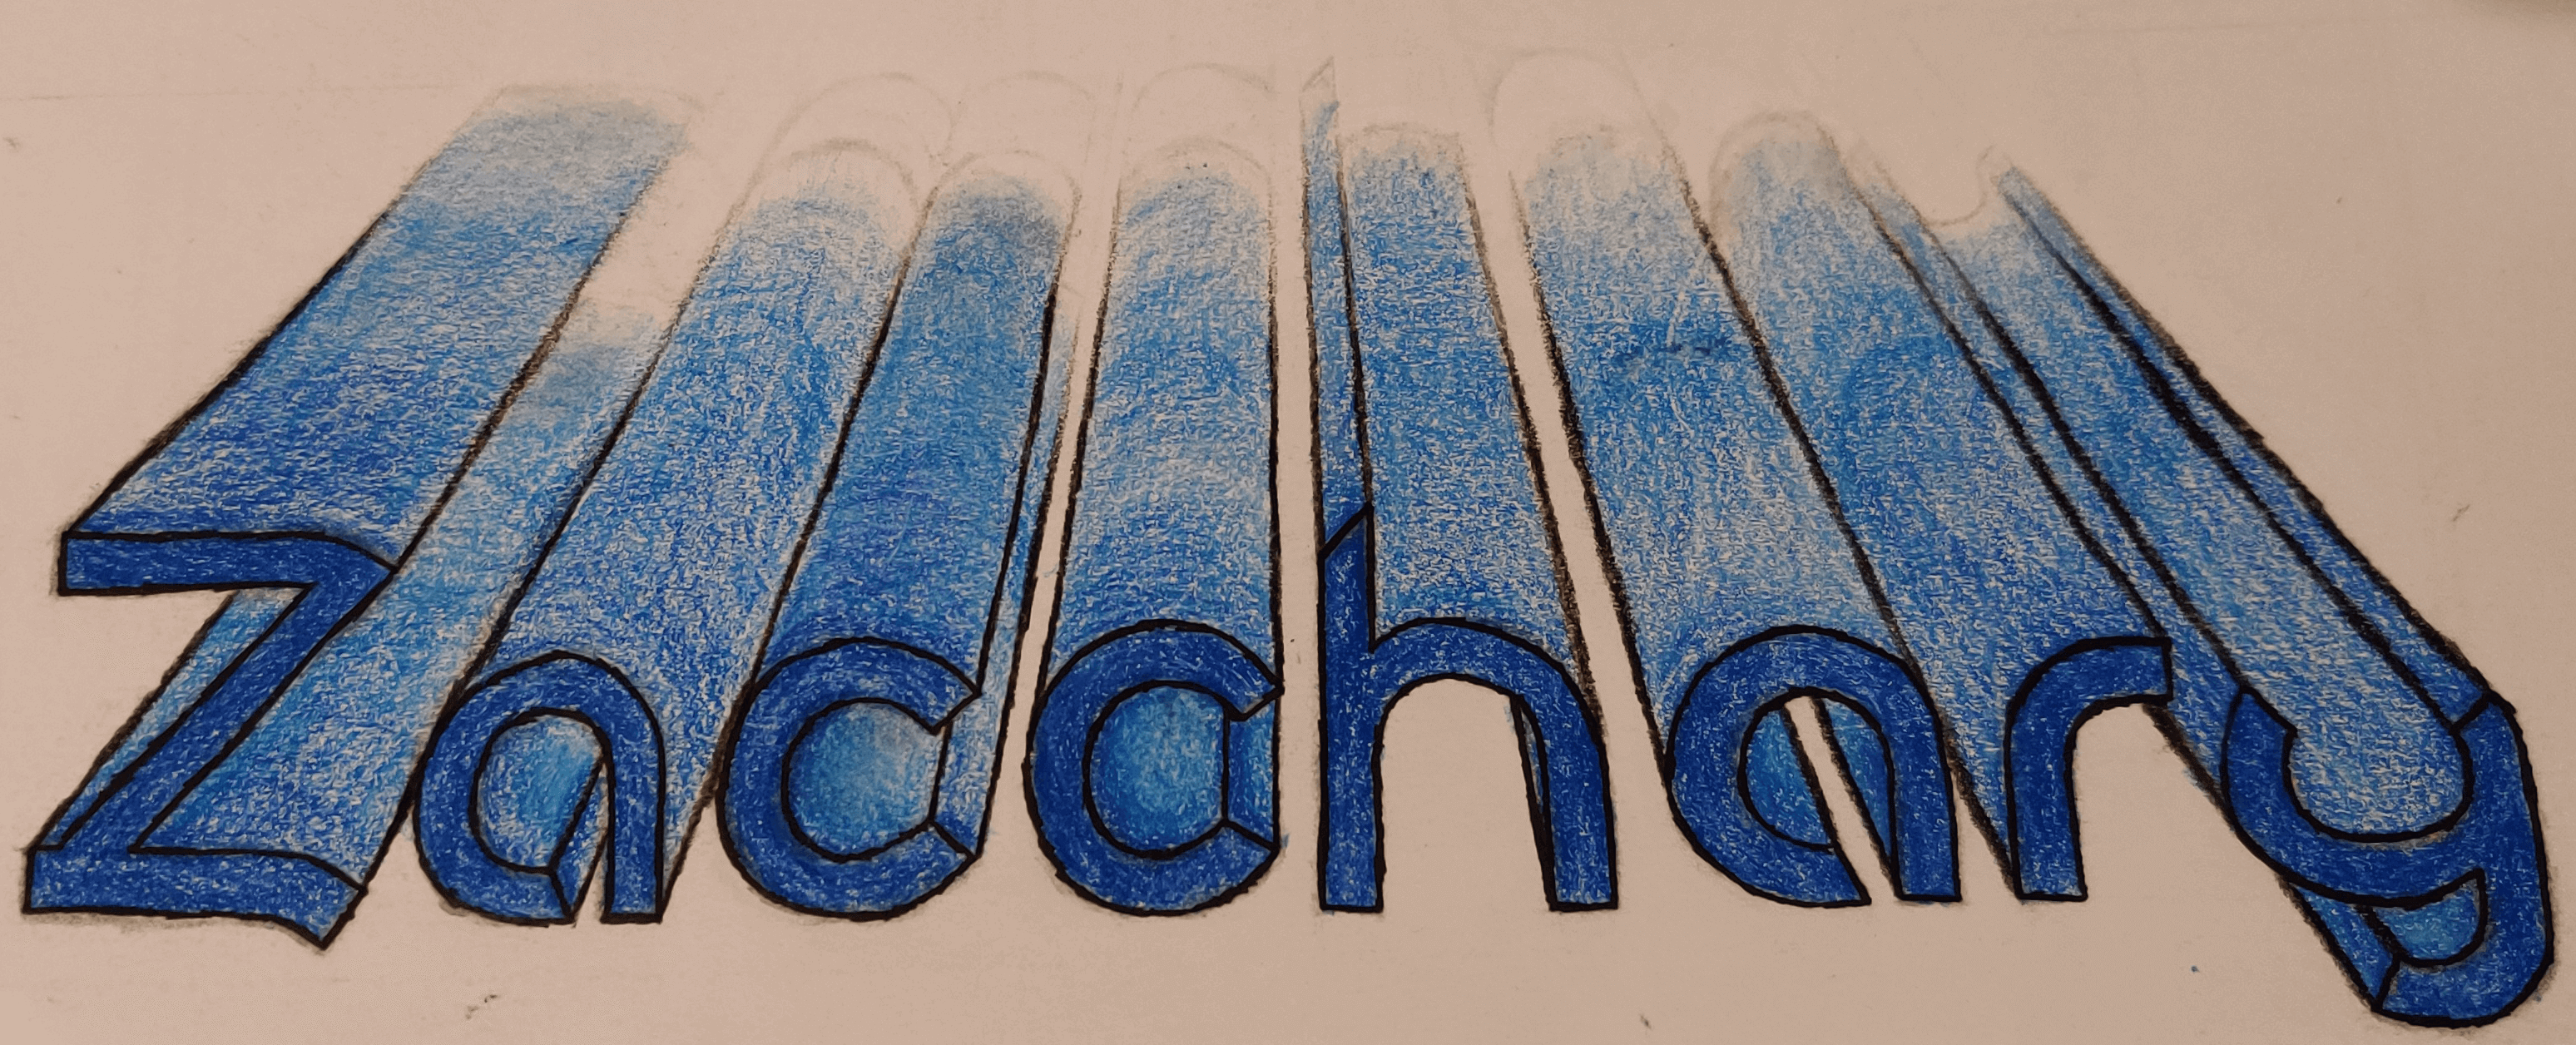 A 3-dimensional perspective drawing of my first name in blue